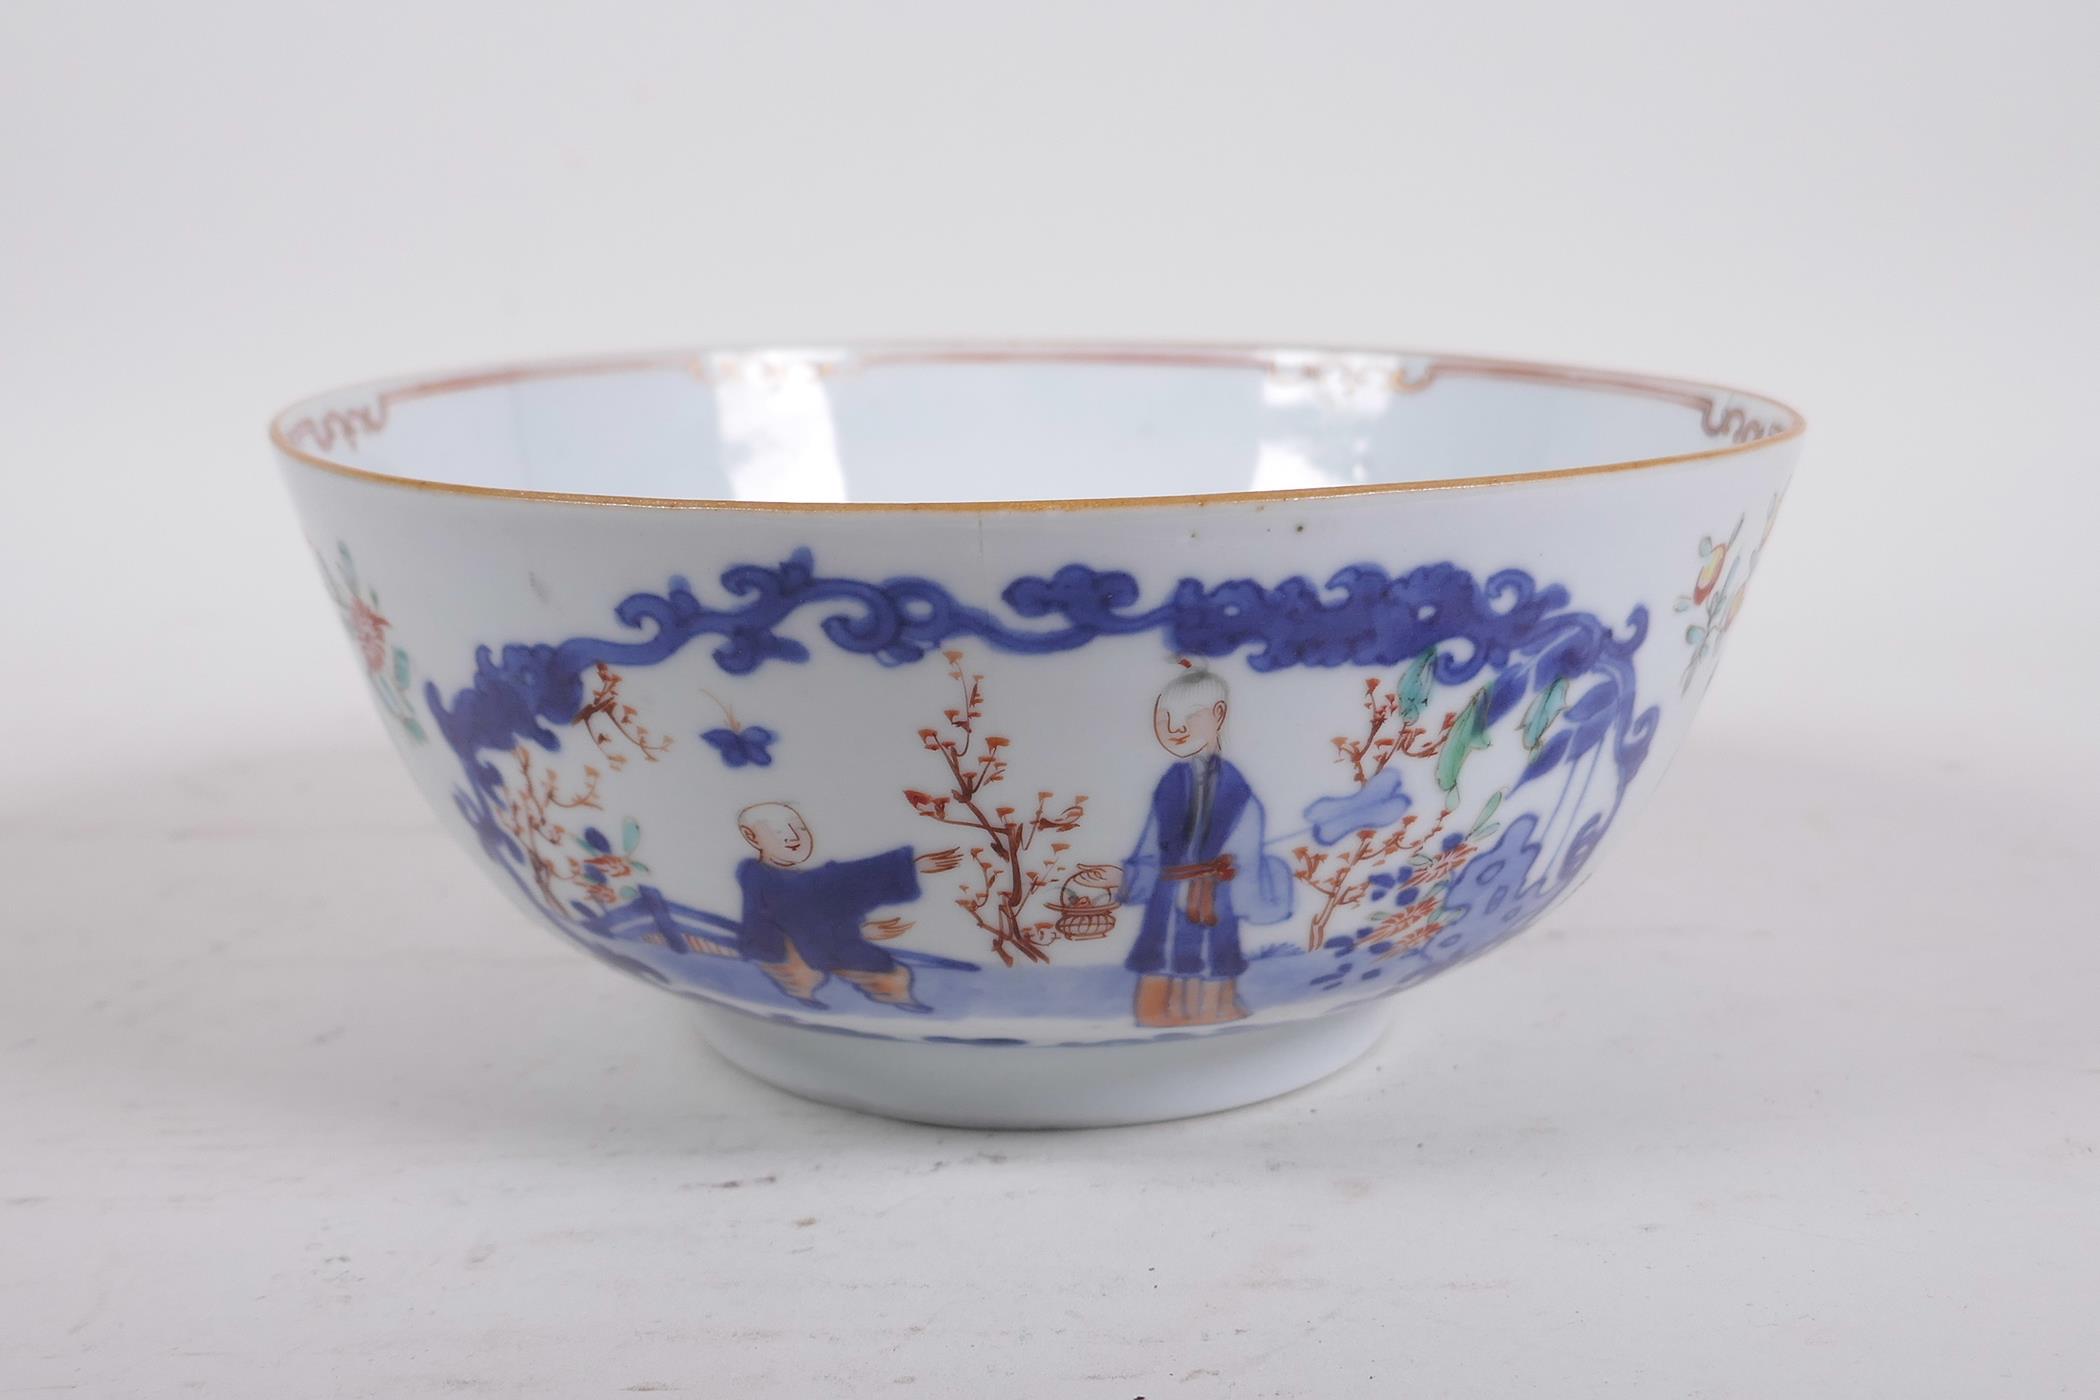 A C18th Chinese polychrome porcelain bowl decorated with figures in a landscape and flowers, 7½"